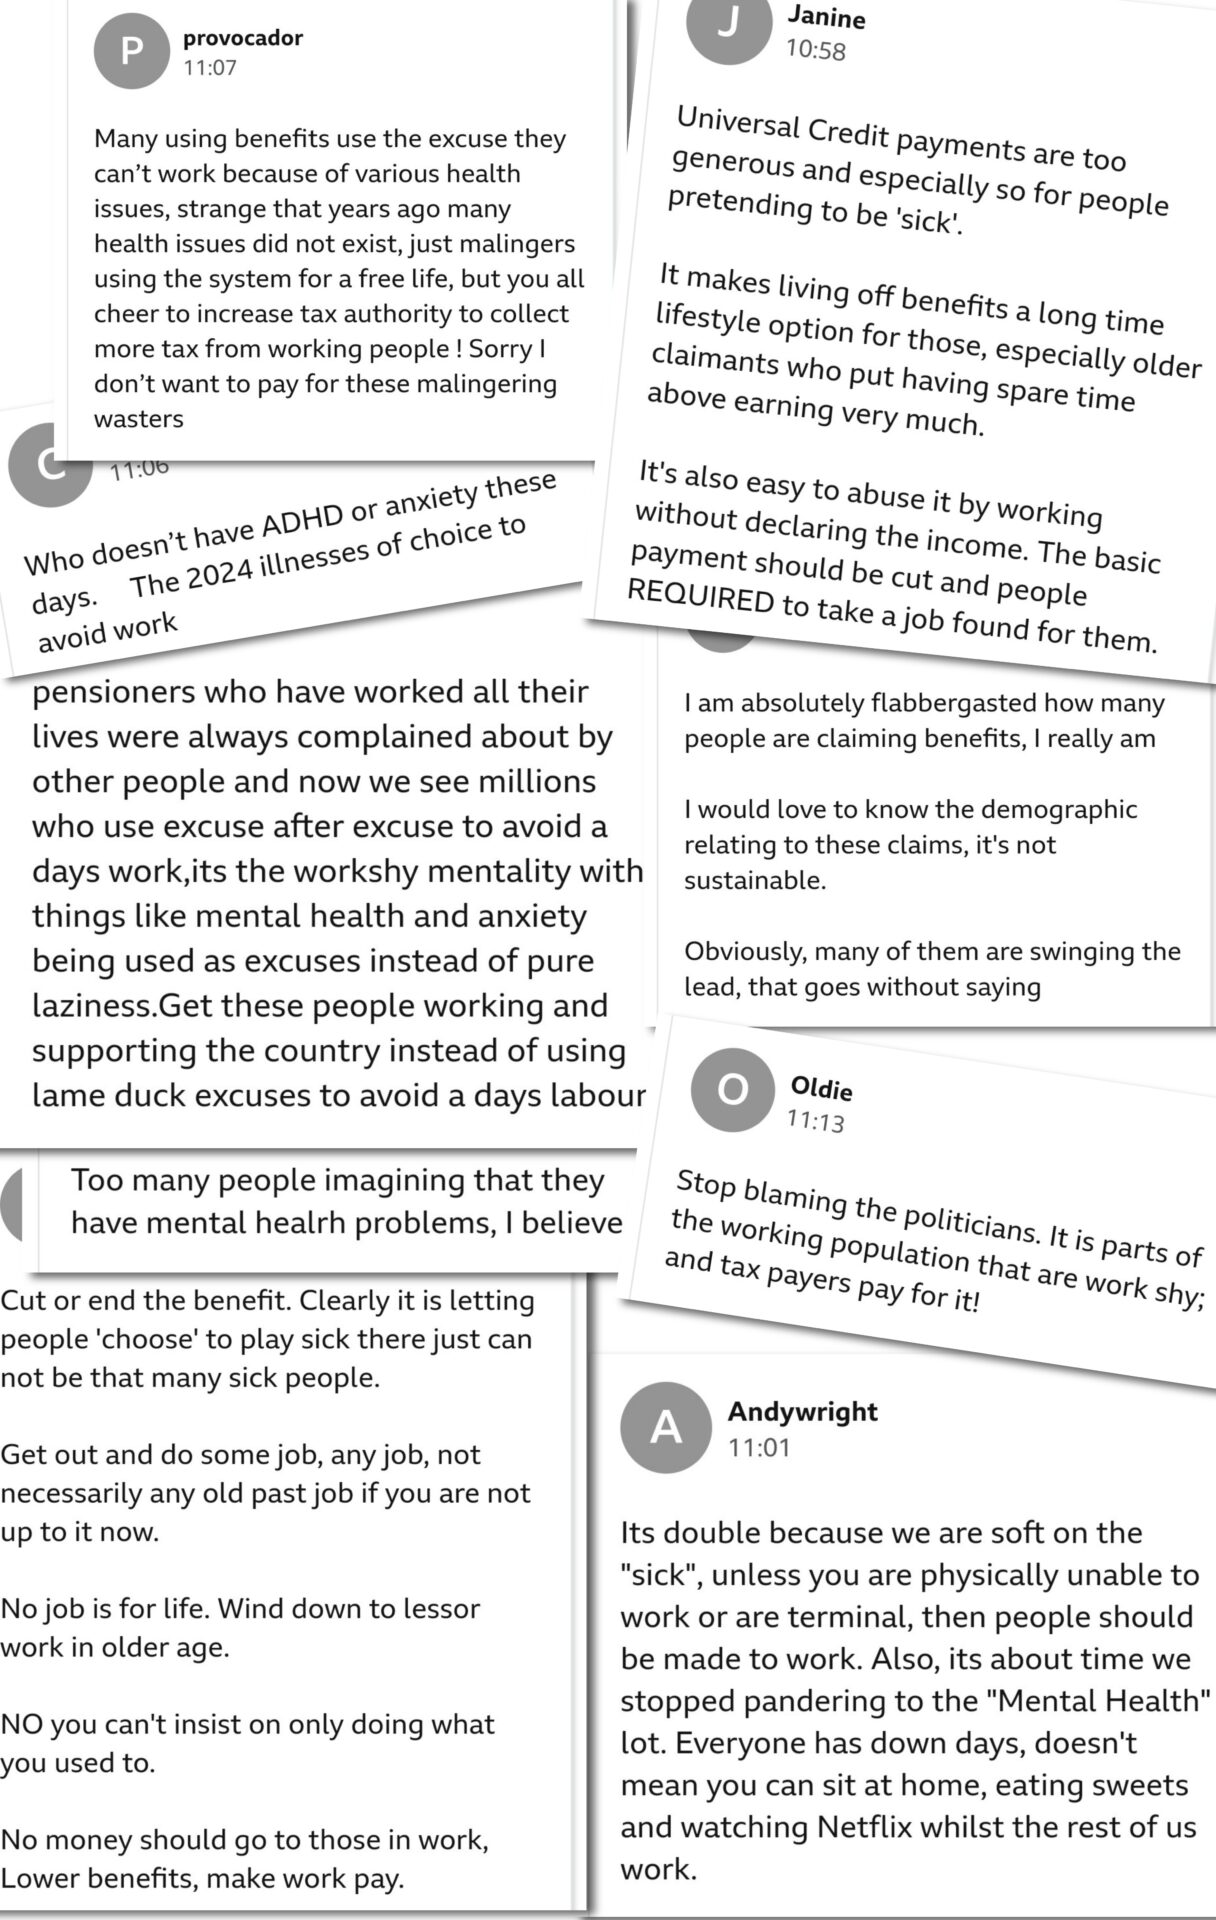 Selection of screenshots showing comments on a news article about Universal Credit and long-term sickness, demonstrating dismissive and cruel attitudes towards people receiving benefits. Comments include:

"Universal Credit payments are too generous and especially so for people pretending to be 'sick'."

"Who doesn't have ADHD or anxiety these days. The 2024 illnesses of choice to avoid work"

"Too many people imagining that they have mental health problems, I believe"